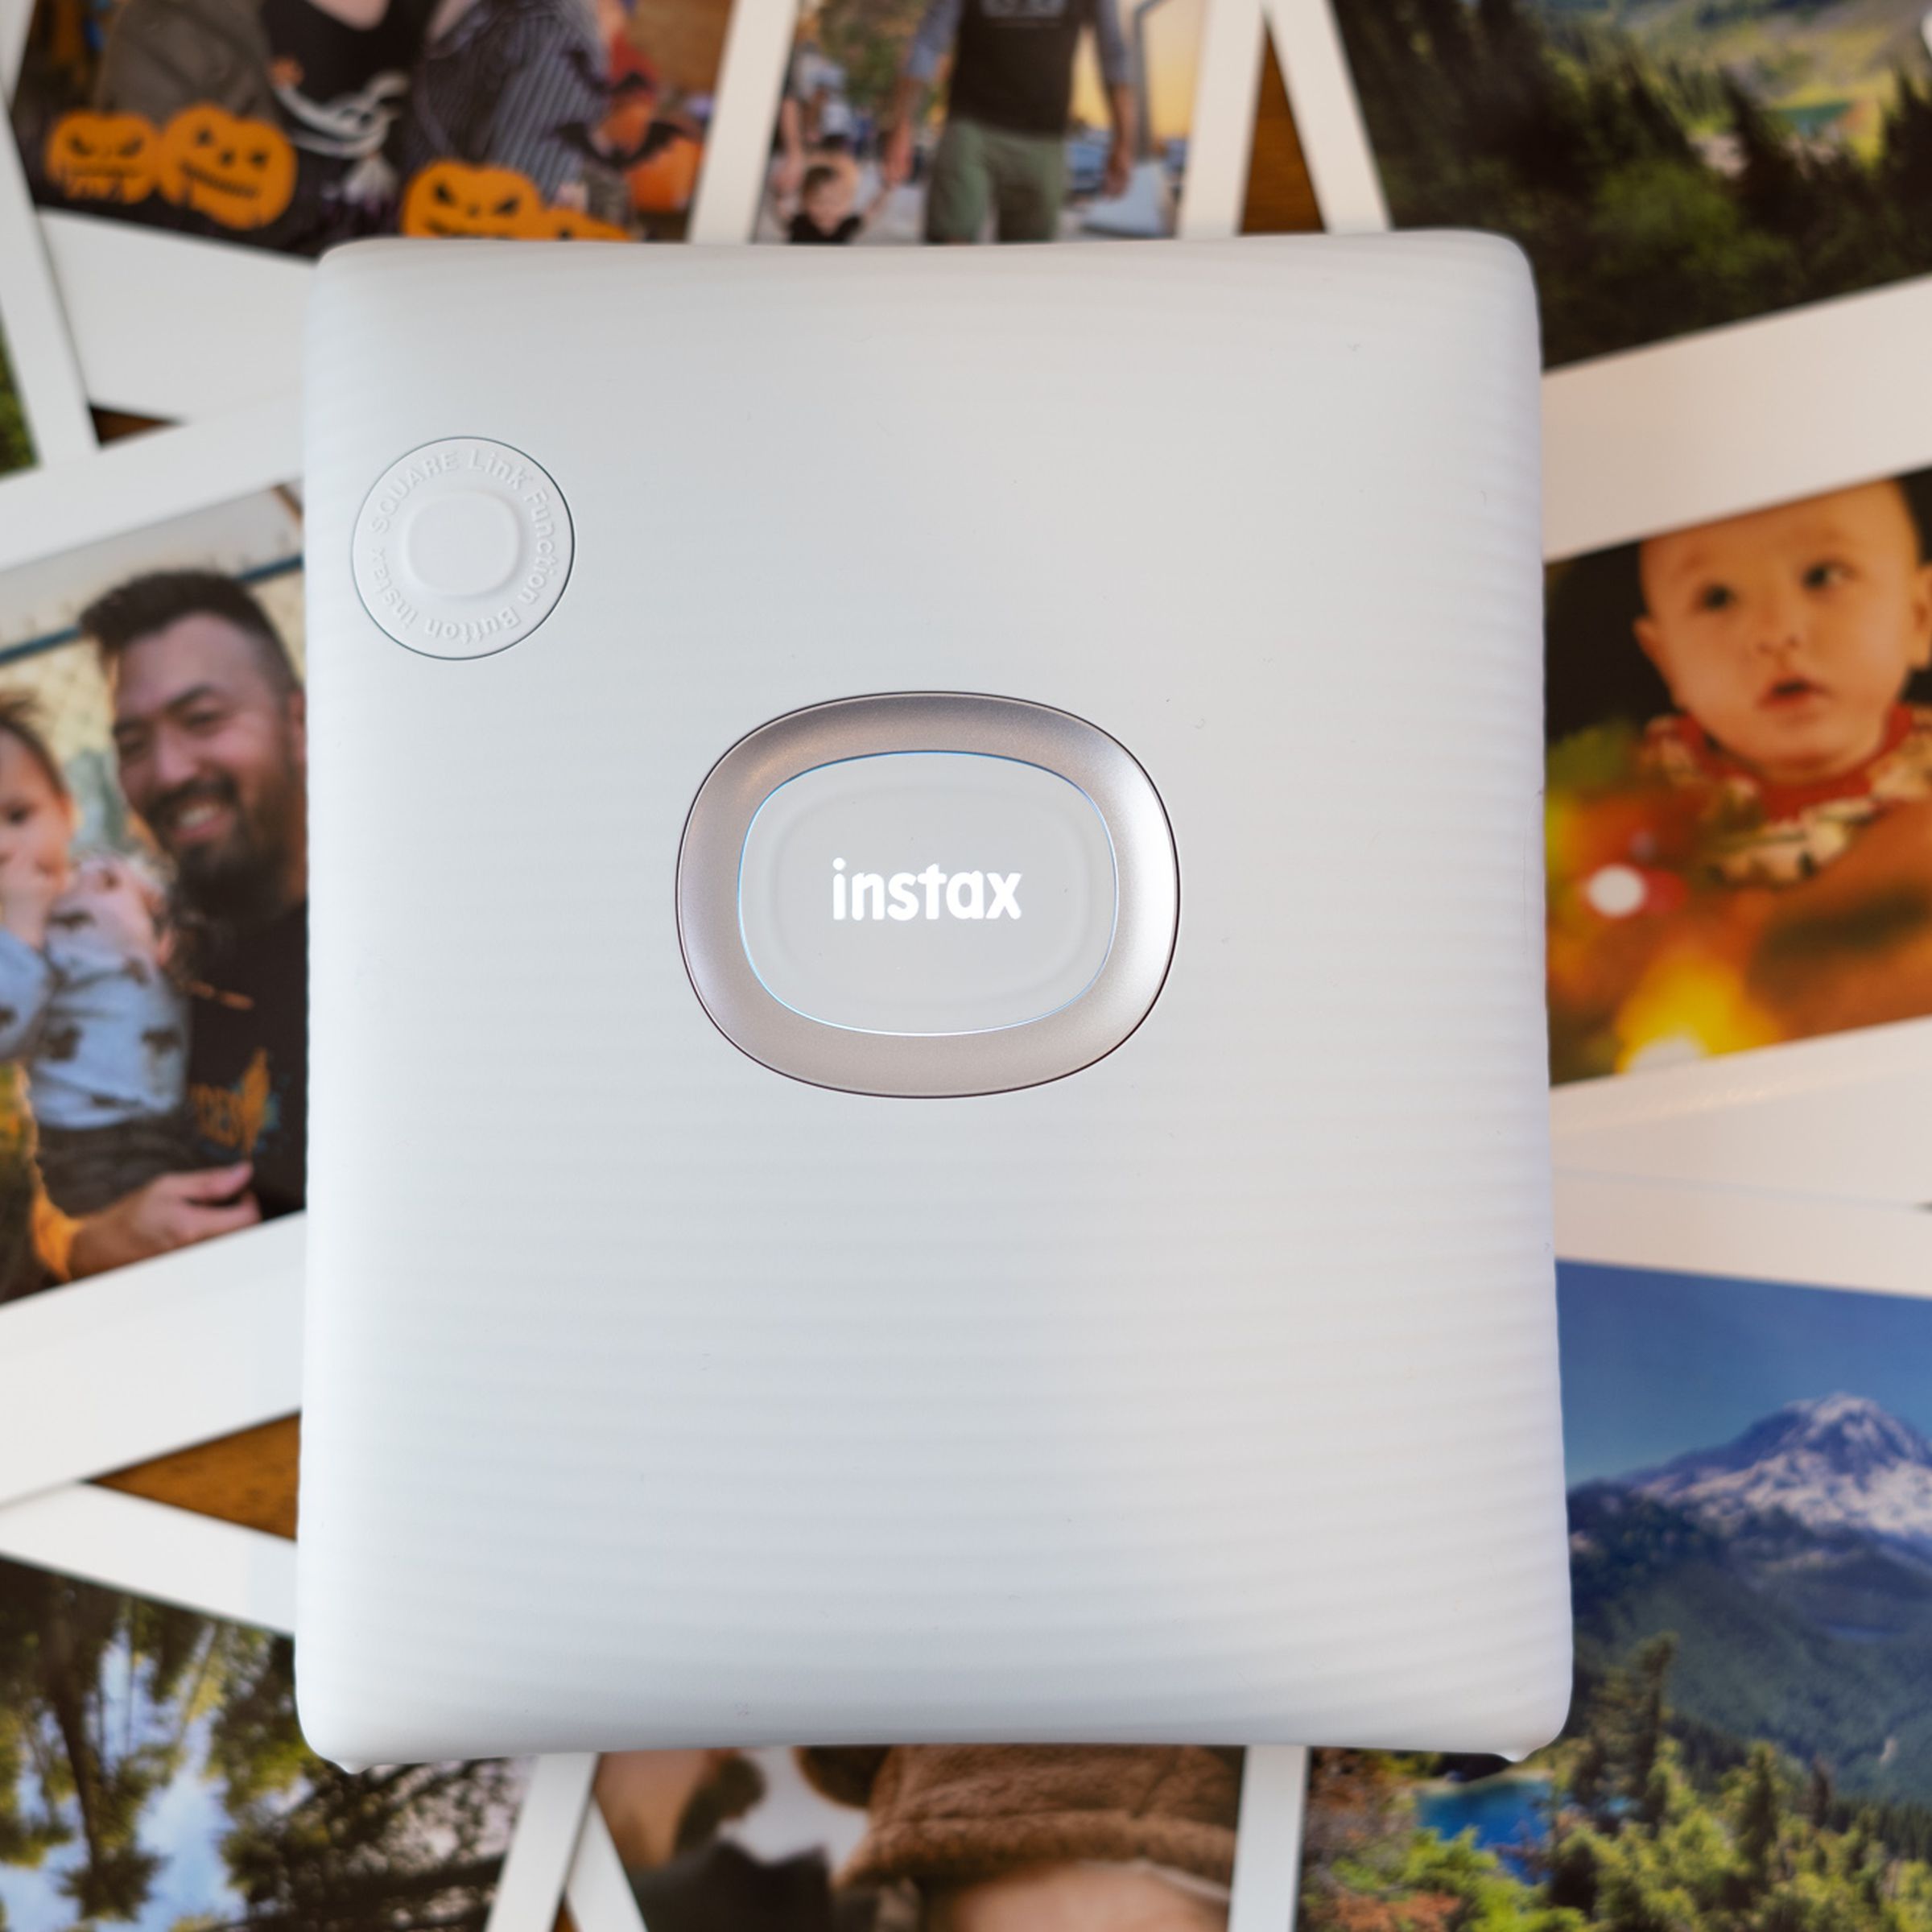 Instax Square printer with logo illuminated on a background of square prints.